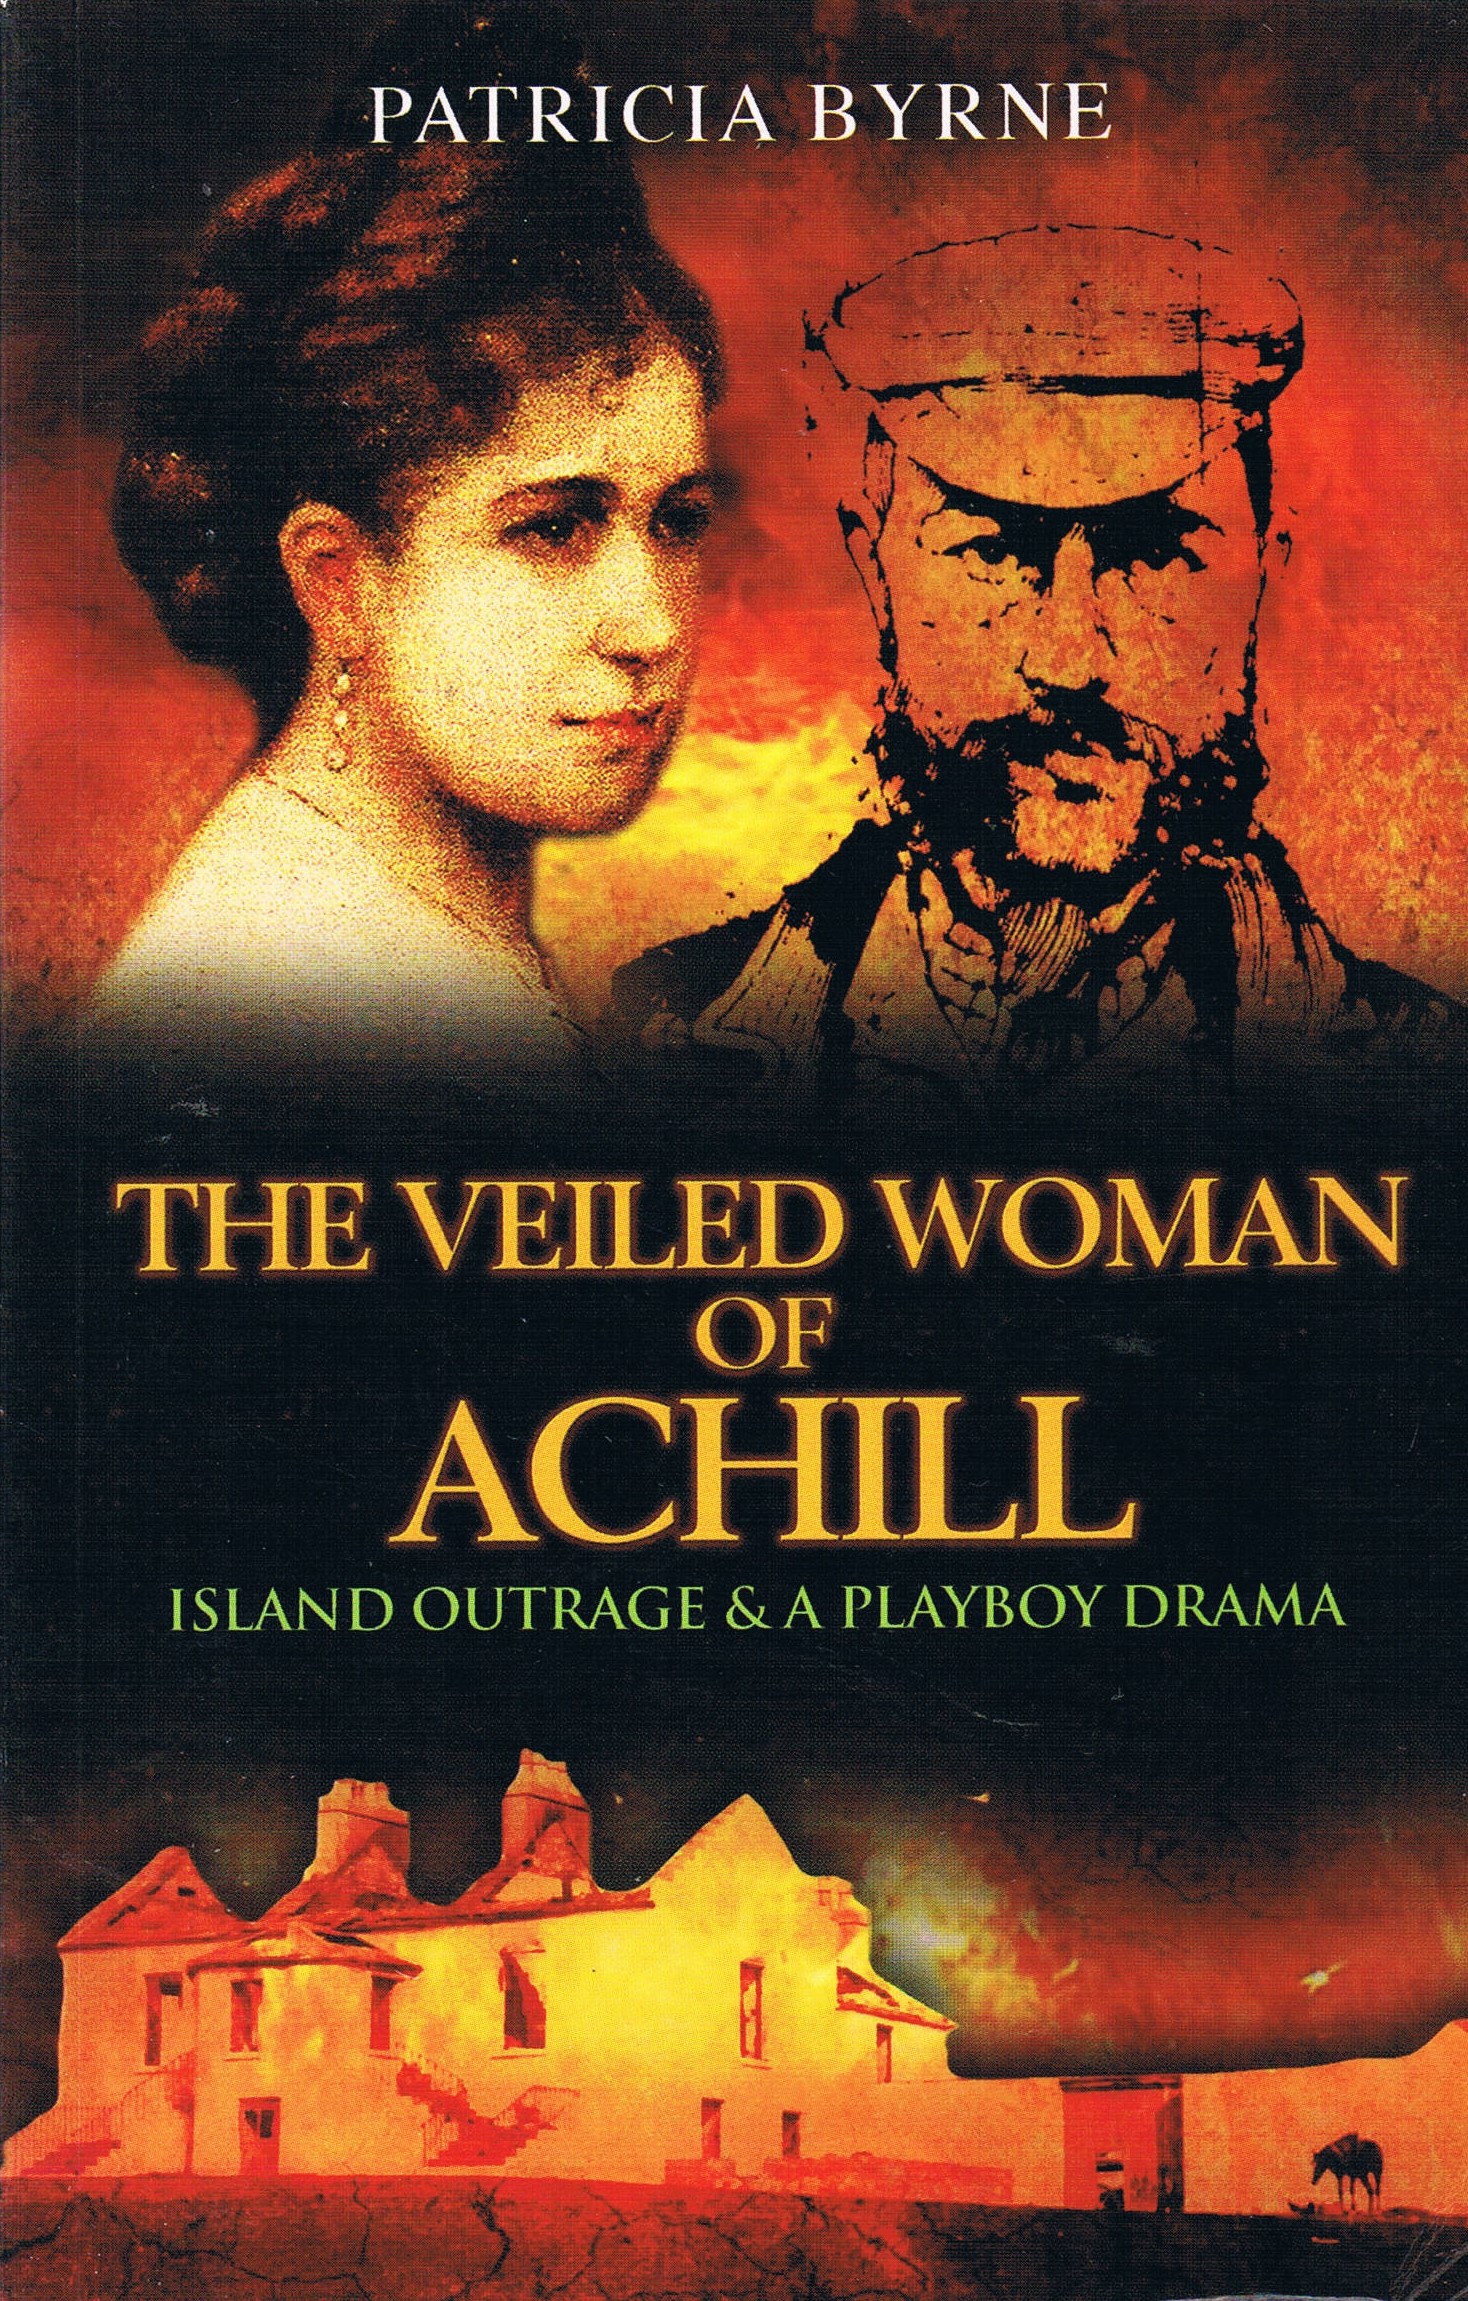 The Veiled Woman of Achill: Island Outrage & a Playboy Drama | Patricia Byrne | Charlie Byrne's